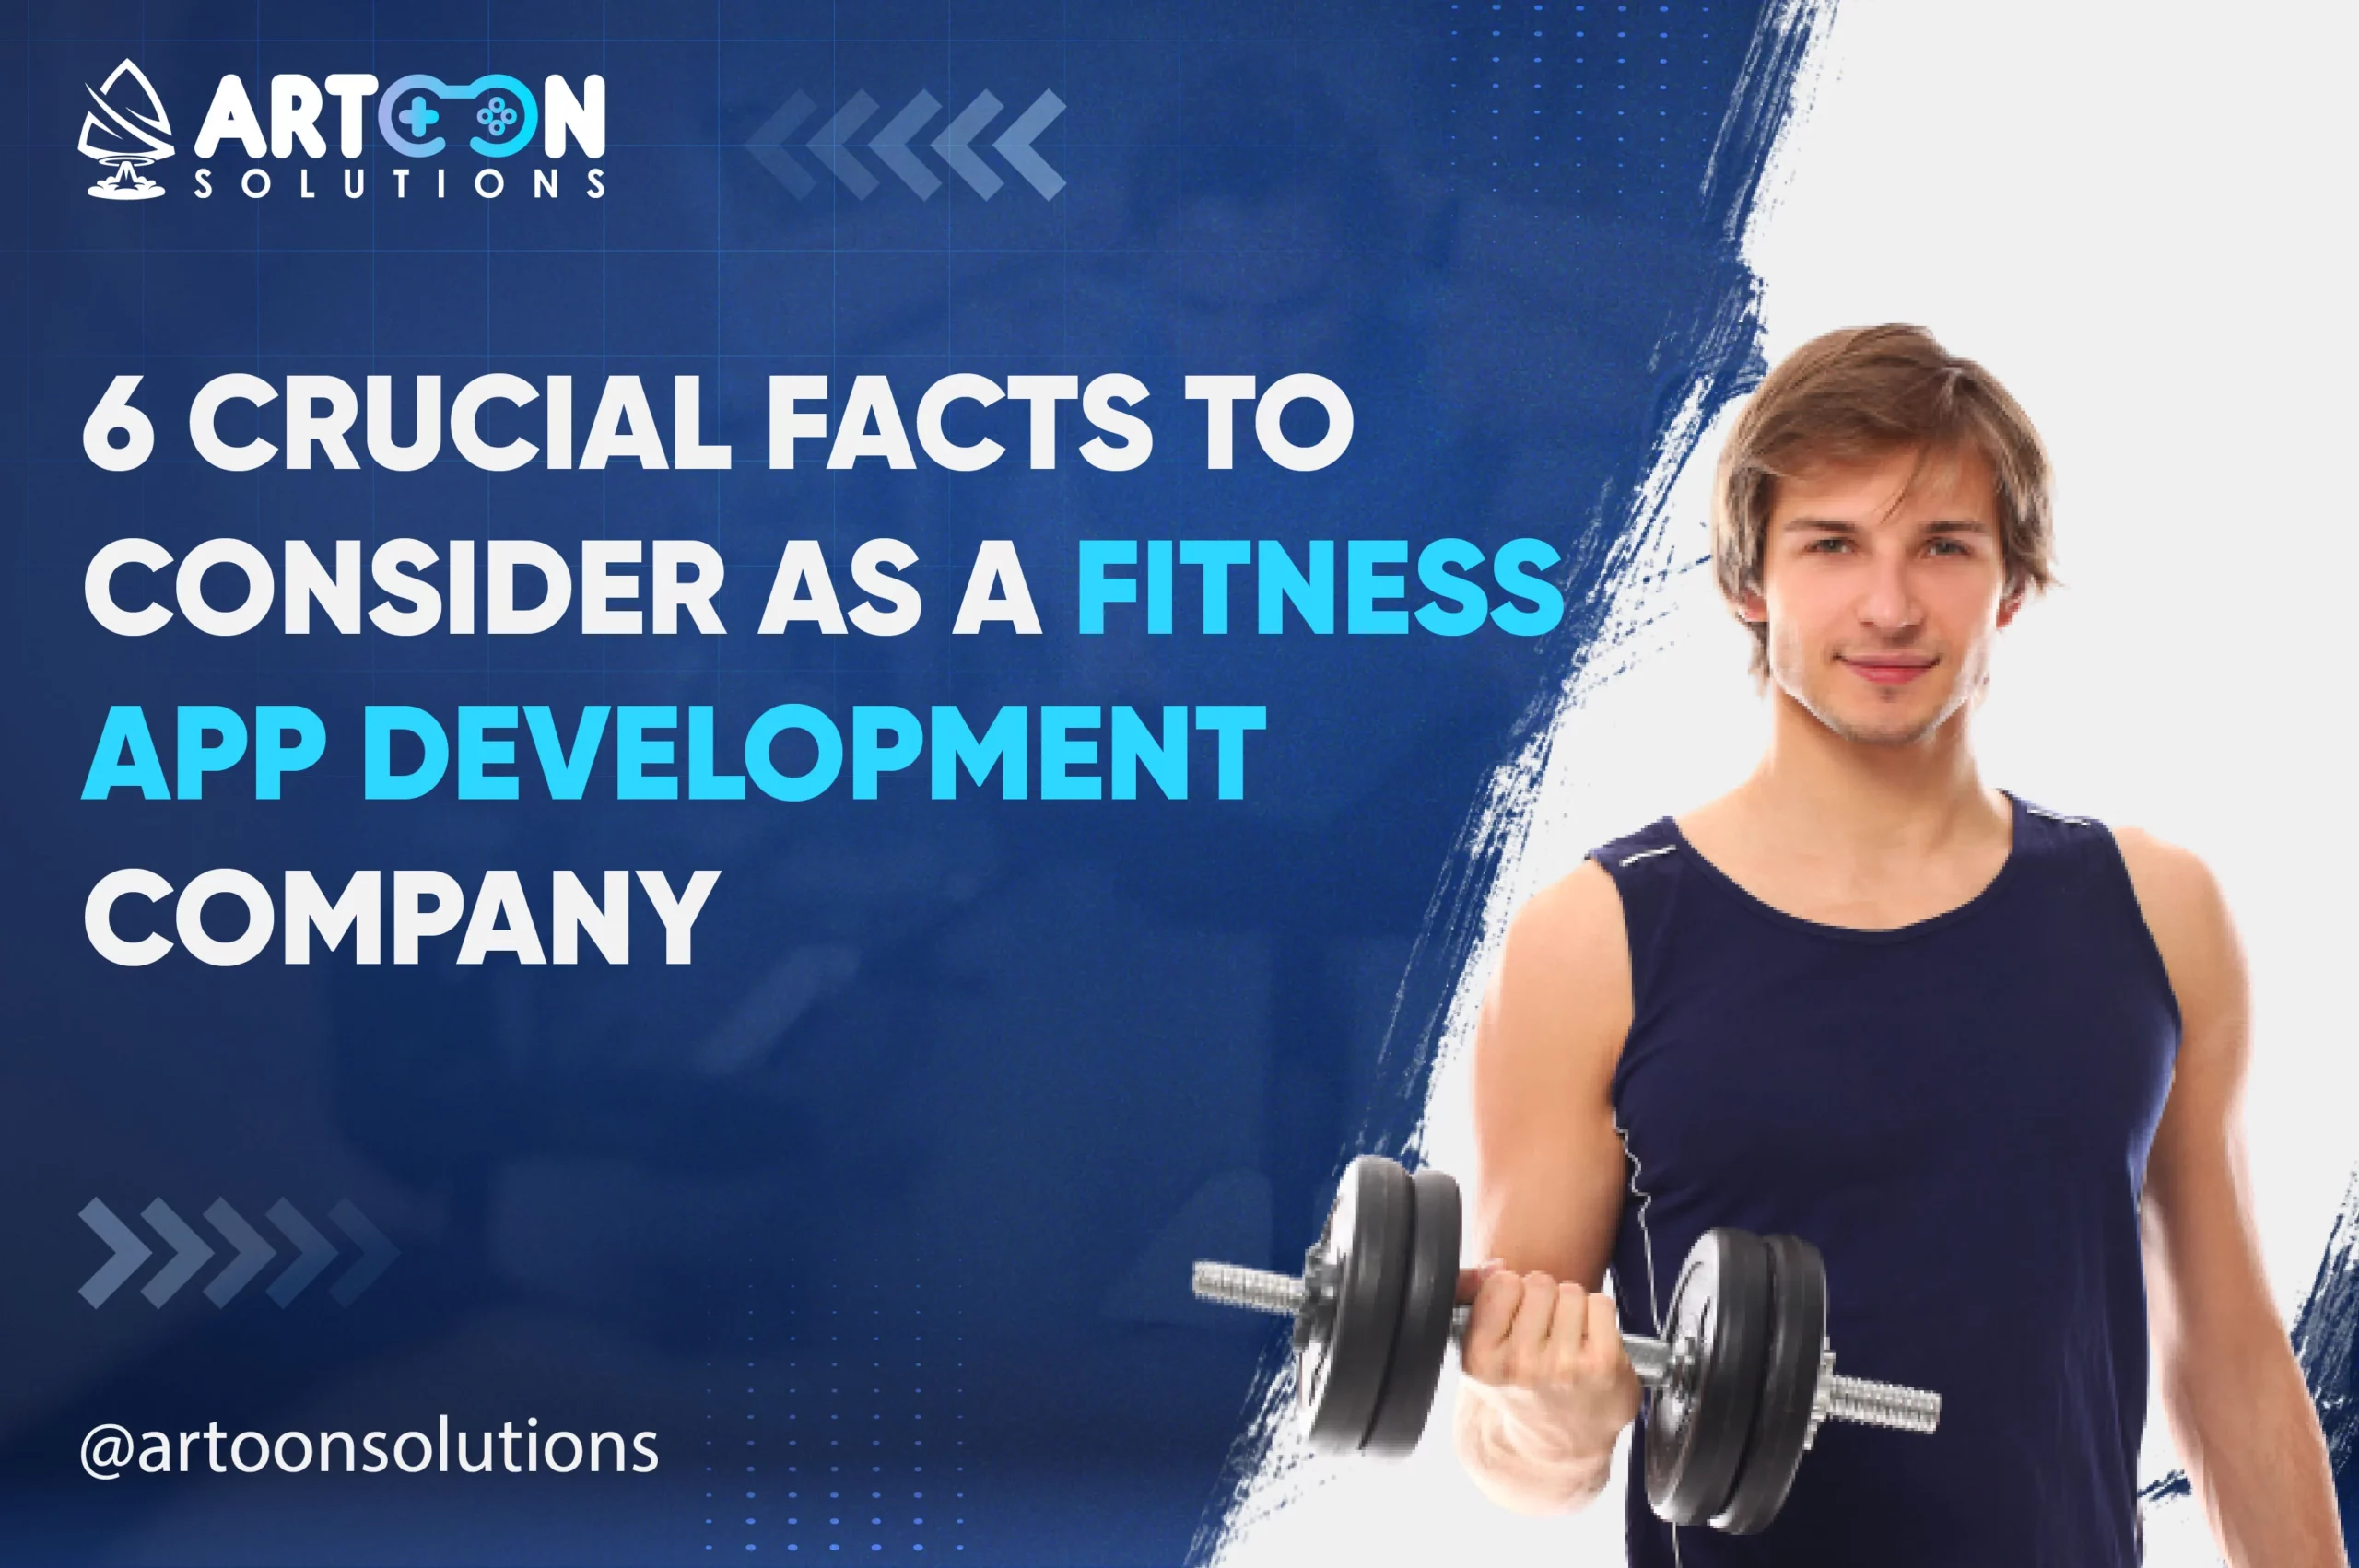 6 Crucial Facts to Consider as a Fitness App Development Company